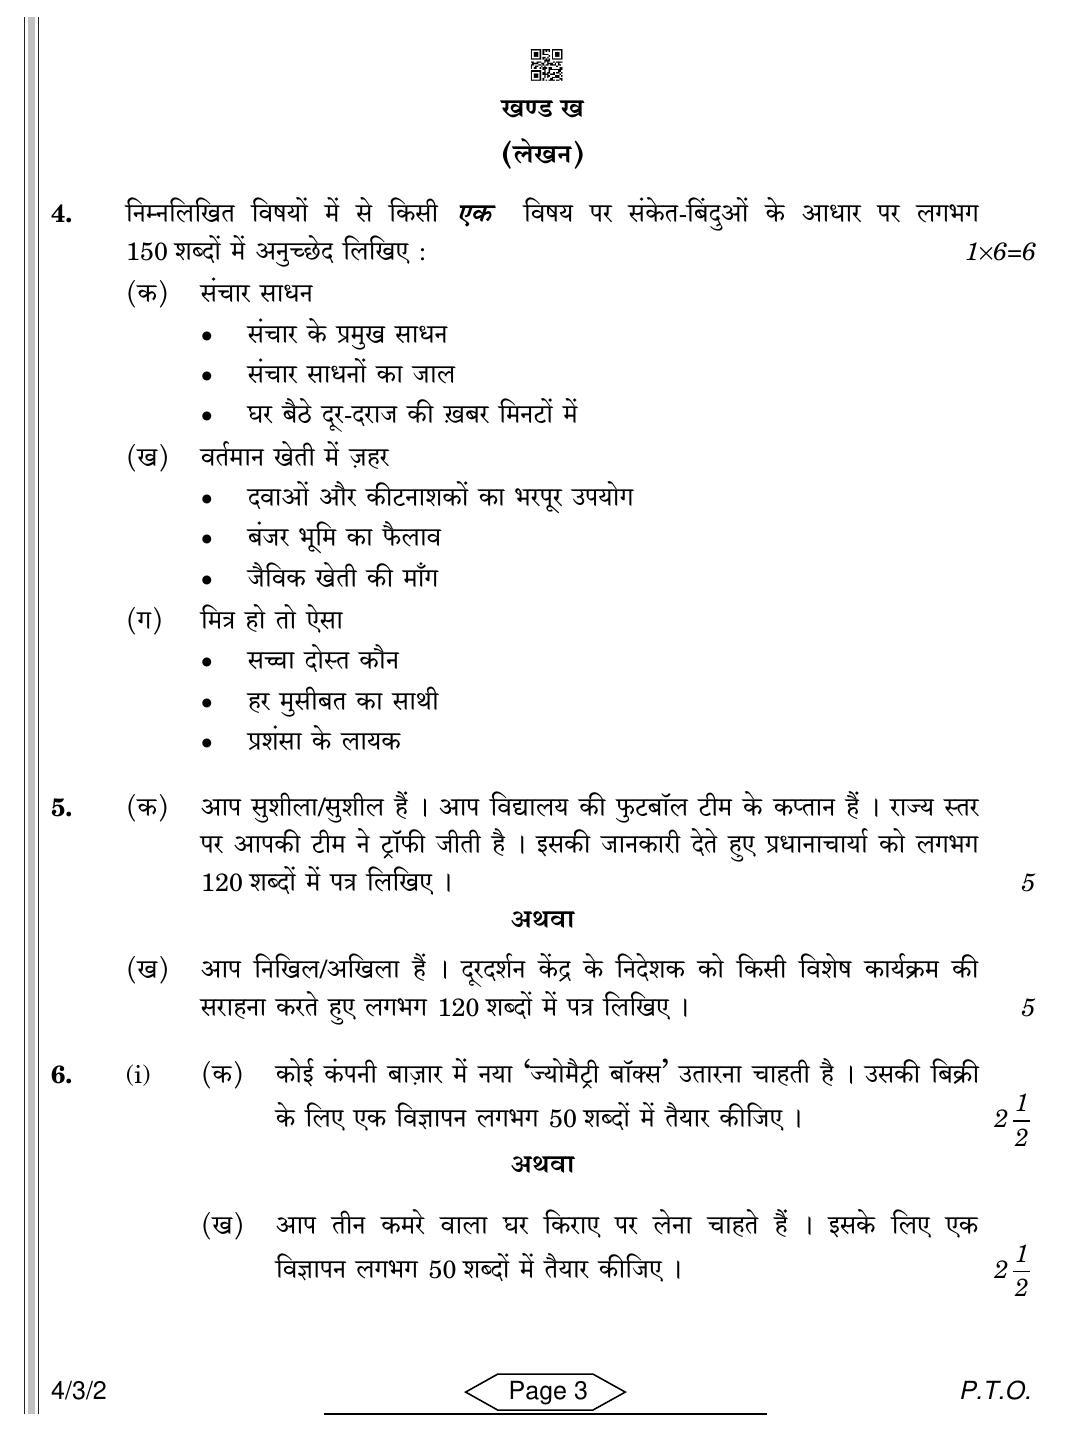 CBSE Class 10 4-3-2 Hindi B 2022 Question Paper - Page 3